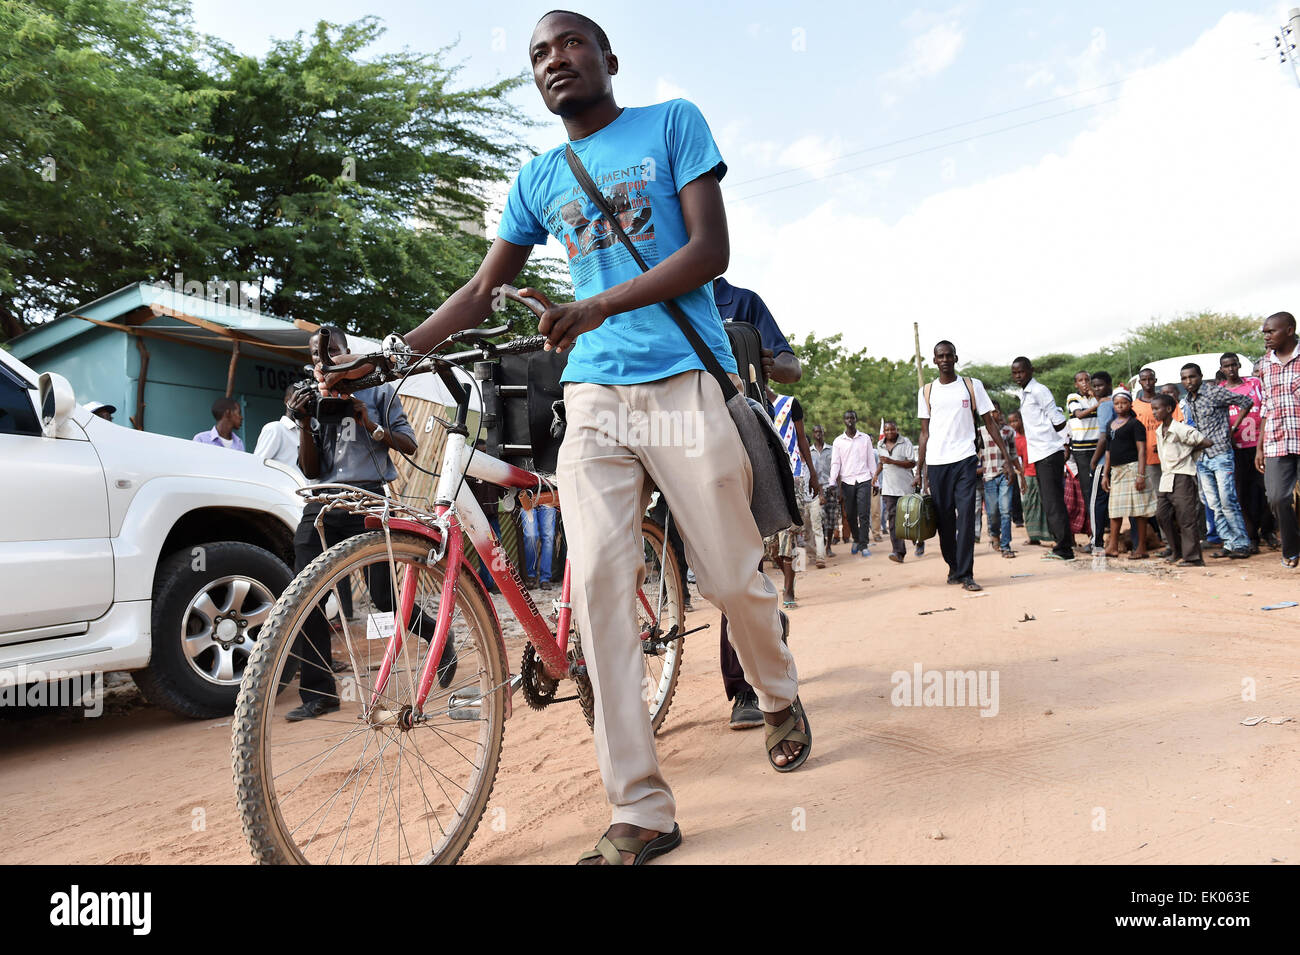 Garissa, Kenya. 3rd Apr, 2015. A student leaves the campus of Moi University in Garissa, northeastern Kenya, April 3, 2015. Ambulances were seen going in and out of the university campus on Friday morning, as police cordoned off the campus and deployed security forces patrolling around major roads in Garissa. Credit:  Sun Ruibo/Xinhua/Alamy Live News Stock Photo